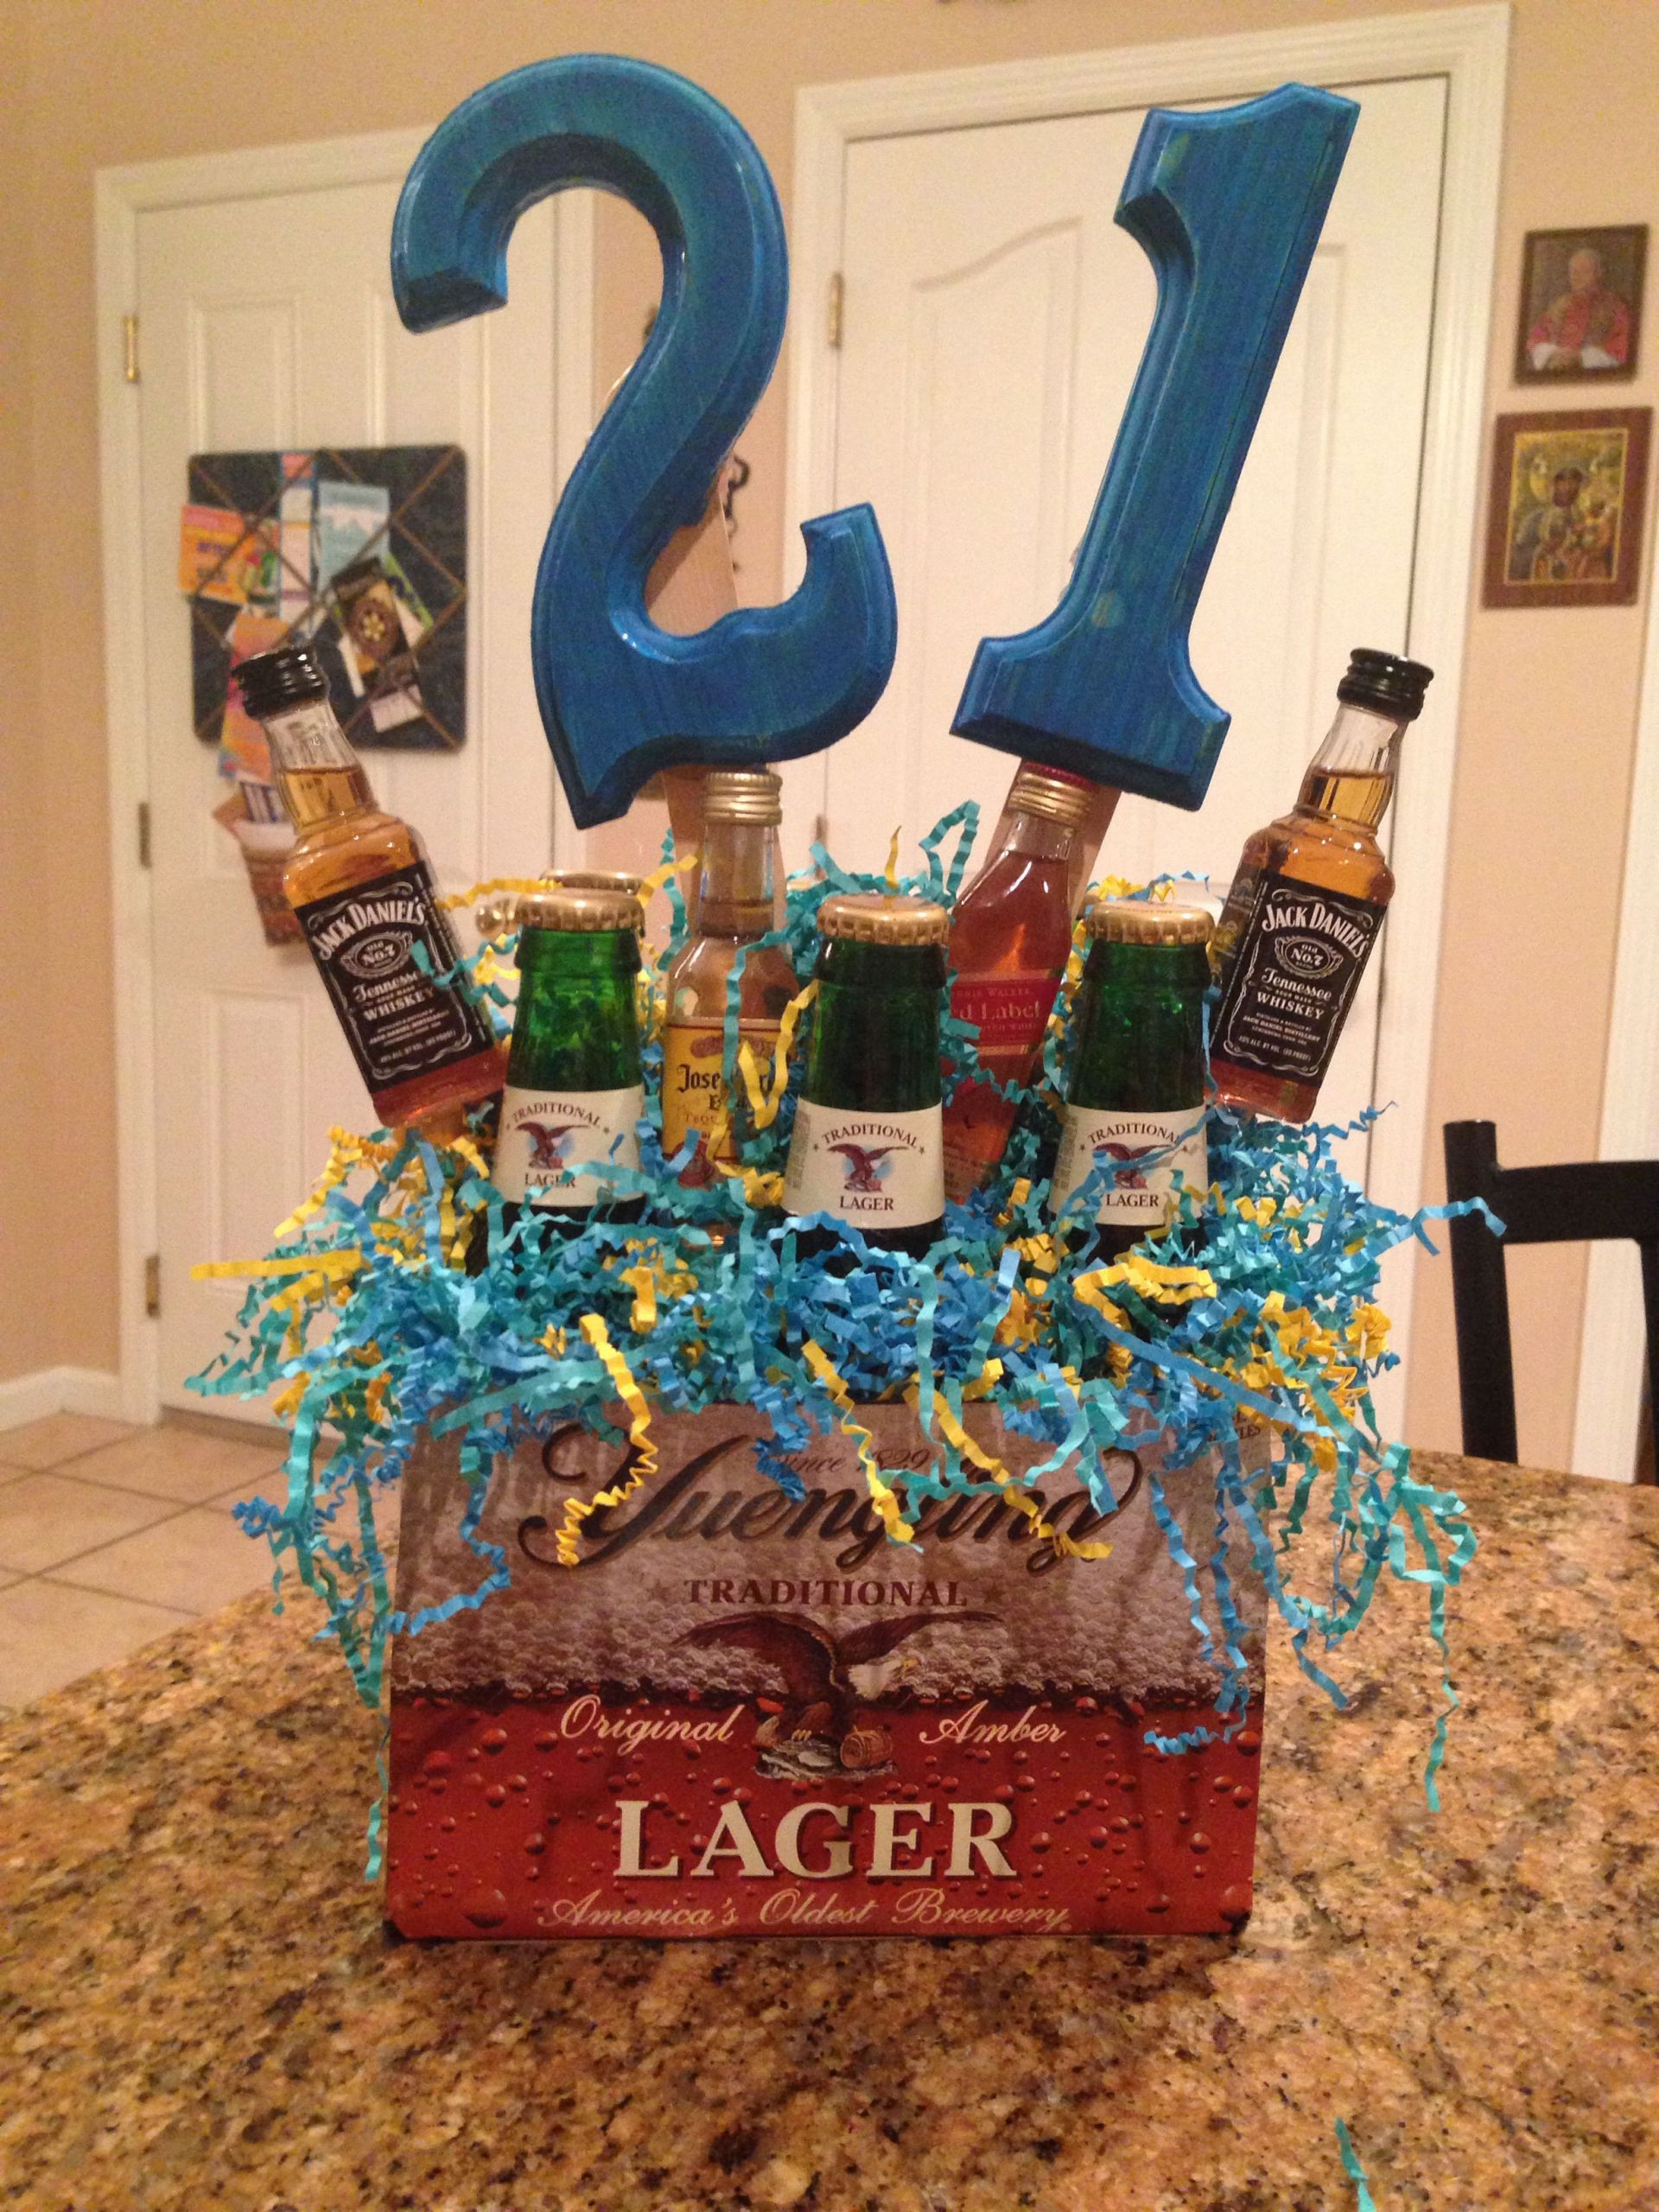 21St Birthday Gift Ideas For Men
 21st birthday idea for guys Favorite drinks and color